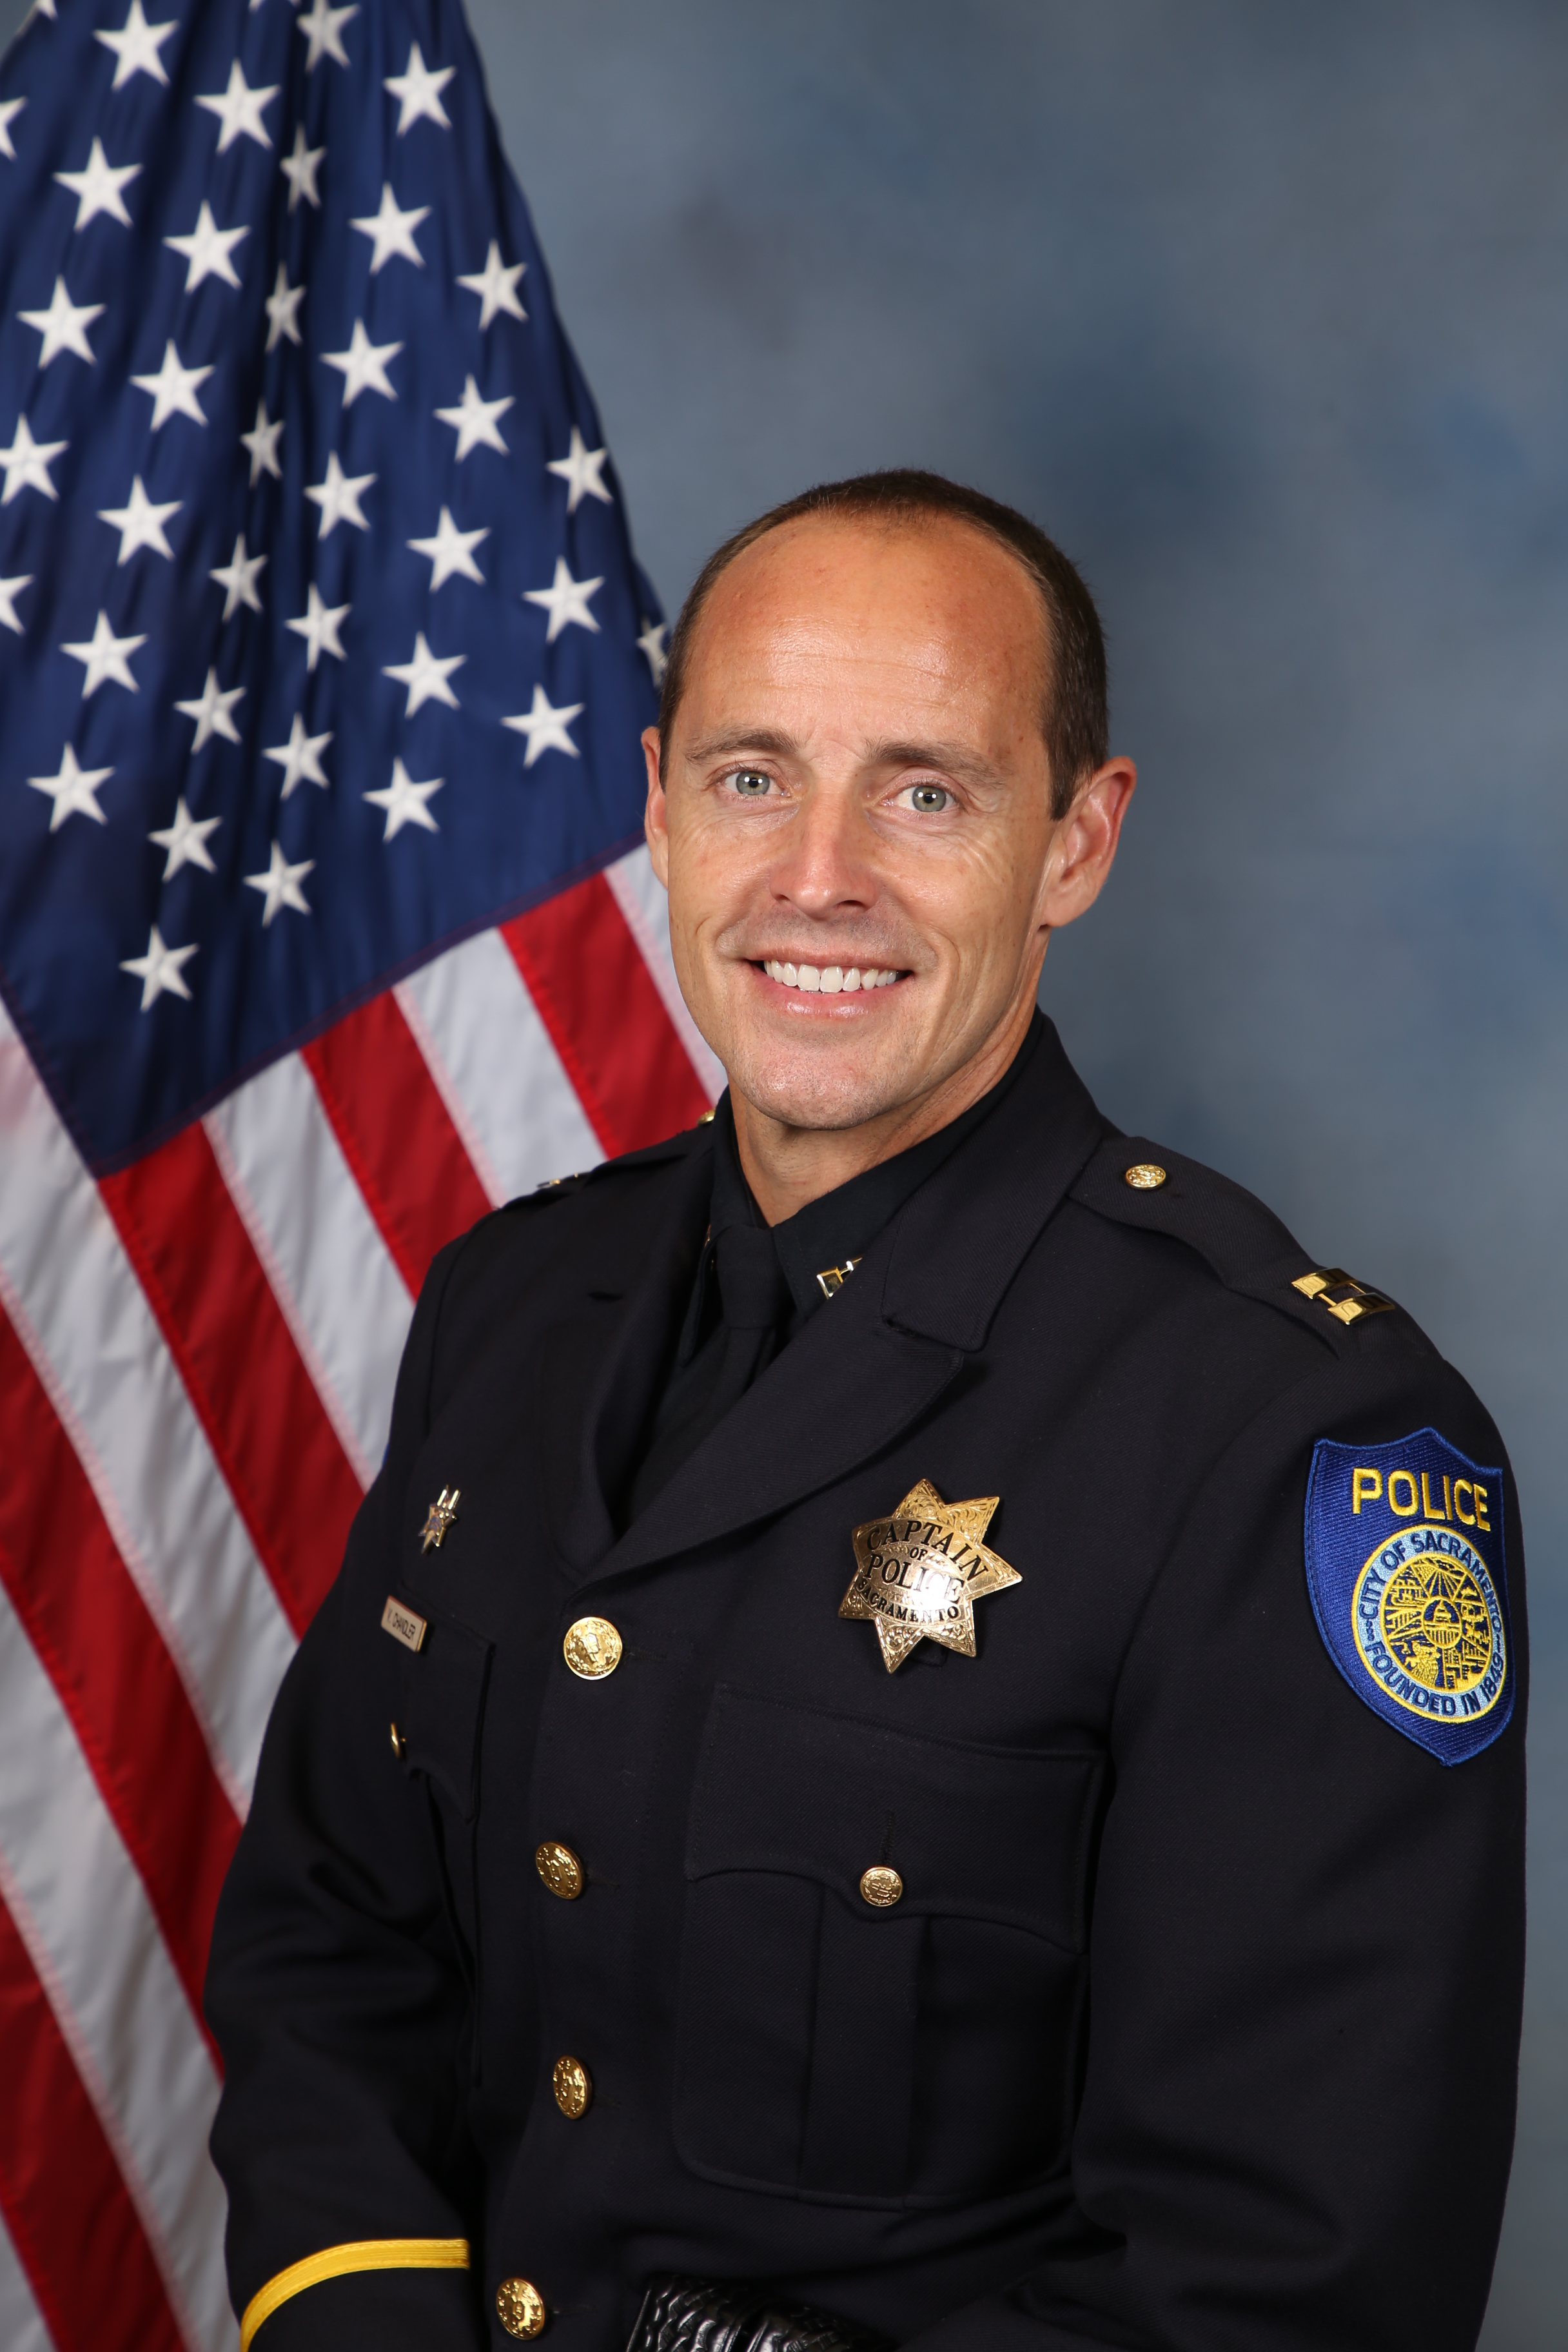 A portrait photo of the Sacramento Police Department Captain Vance Chandler, in full class-A uniform